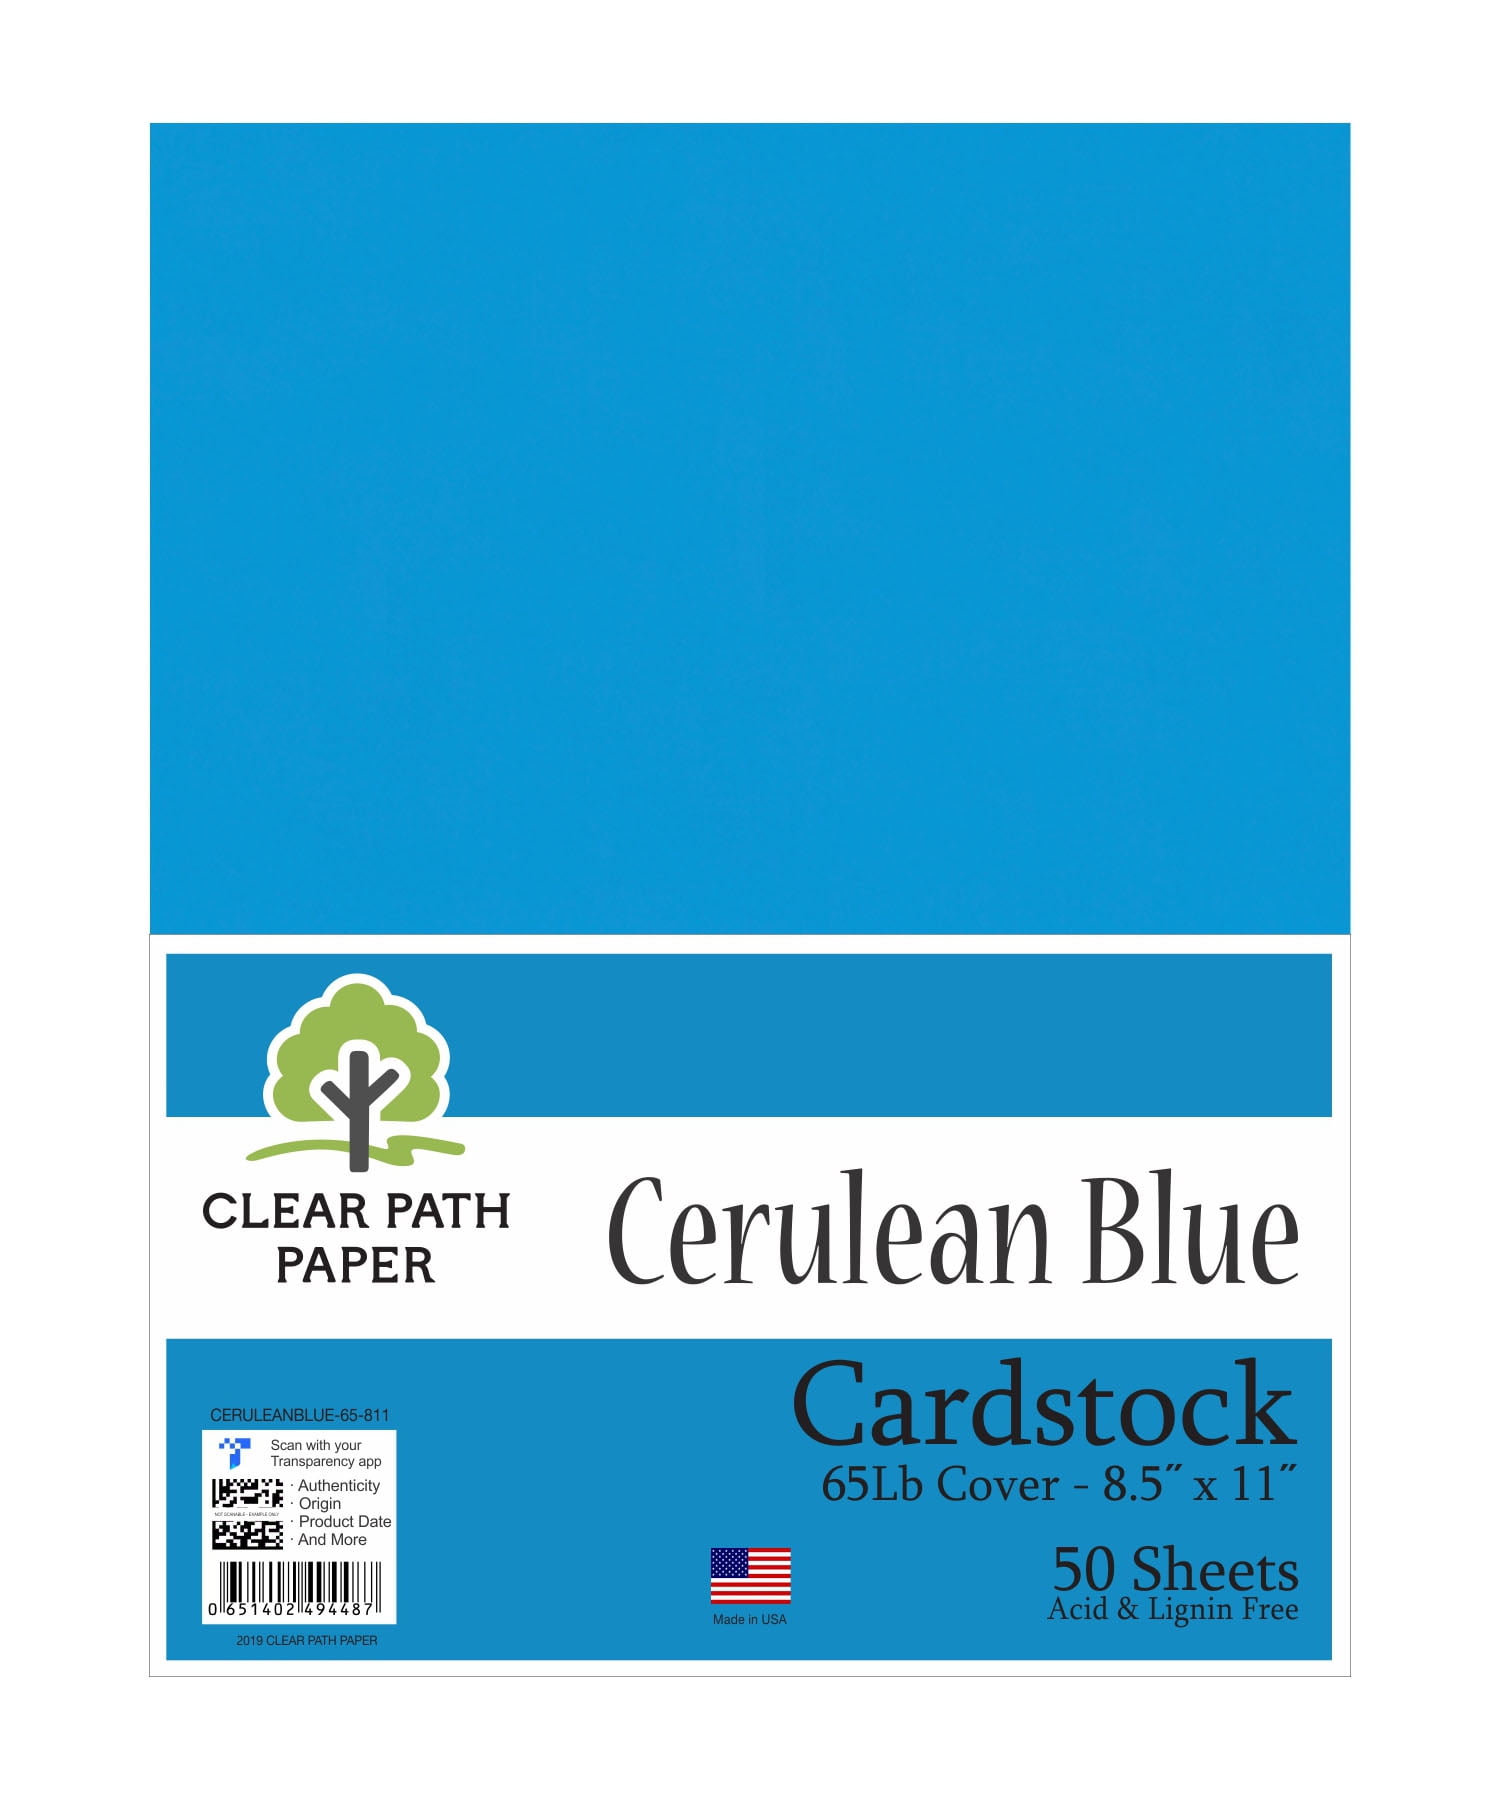 Cerulean Blue Cardstock - 8.5 x 11 inch - 65Lb Cover - 50 Sheets - Clear  Path Paper 